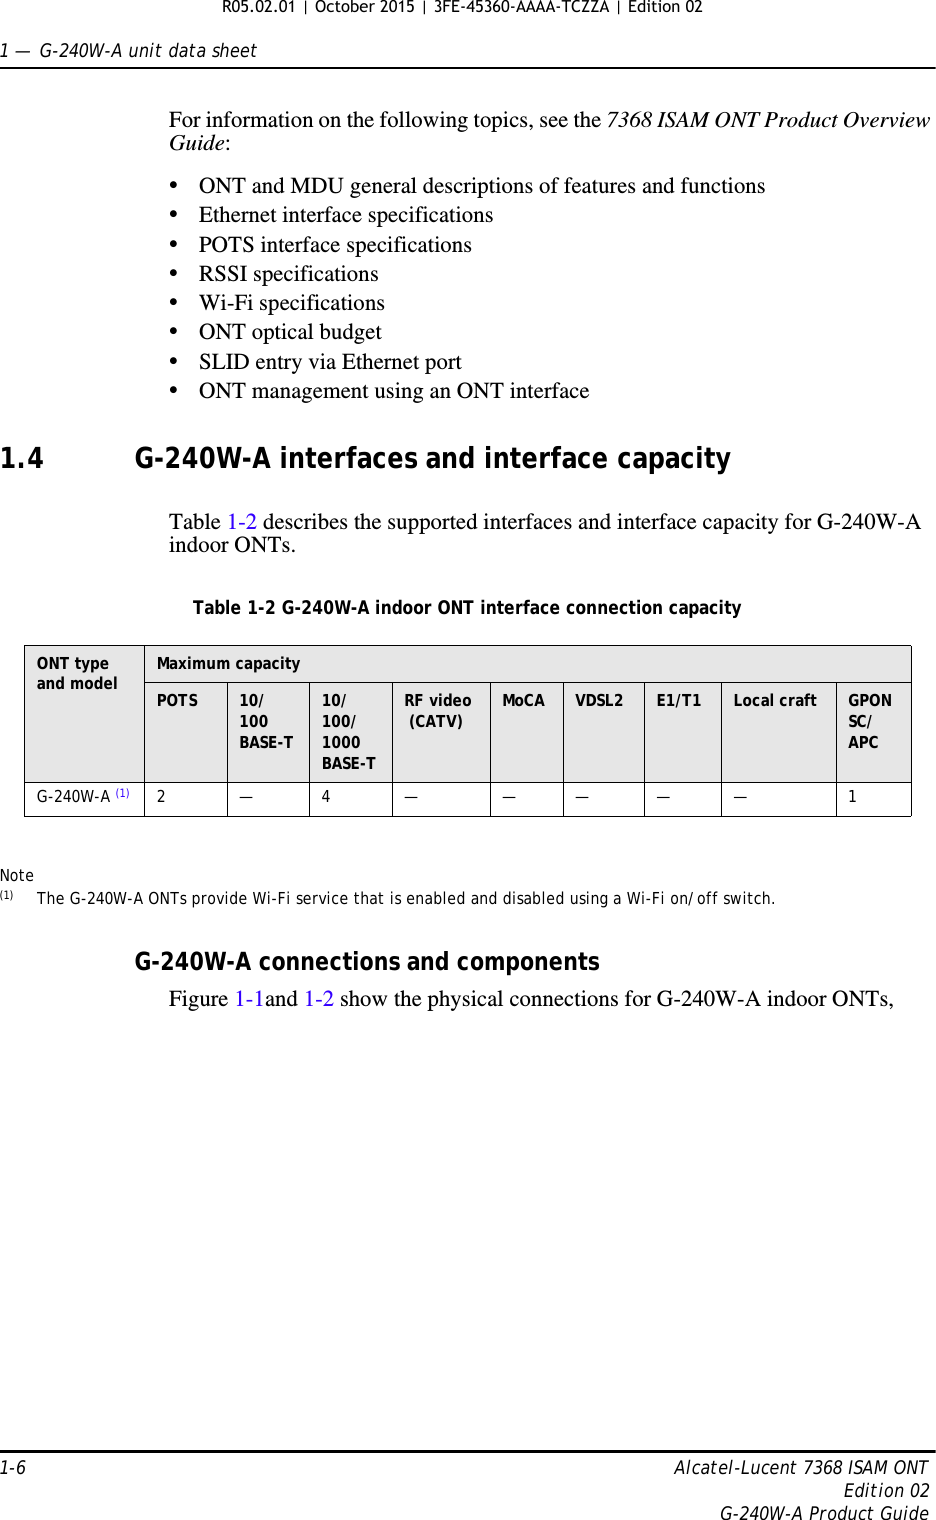 1 —  G-240W-A unit data sheet1-6 Alcatel-Lucent 7368 ISAM ONTEdition 02G-240W-A Product GuideFor information on the following topics, see the 7368 ISAM ONT Product Overview Guide:•ONT and MDU general descriptions of features and functions•Ethernet interface specifications•POTS interface specifications•RSSI specifications•Wi-Fi specifications•ONT optical budget•SLID entry via Ethernet port•ONT management using an ONT interface1.4 G-240W-A interfaces and interface capacityTable 1-2 describes the supported interfaces and interface capacity for G-240W-A indoor ONTs.Table 1-2 G-240W-A indoor ONT interface connection capacityNote(1) The G-240W-A ONTs provide Wi-Fi service that is enabled and disabled using a Wi-Fi on/off switch. G-240W-A connections and componentsFigure 1-1and 1-2 show the physical connections for G-240W-A indoor ONTs, ONT type and model  Maximum capacityPOTS 10/ 100BASE-T10/ 100/ 1000 BASE-TRF video (CATV) MoCA VDSL2 E1/T1 Local craft GPONSC/APCG-240W-A (1) 2—4— ———— 1 R05.02.01 | October 2015 | 3FE-45360-AAAA-TCZZA | Edition 02 